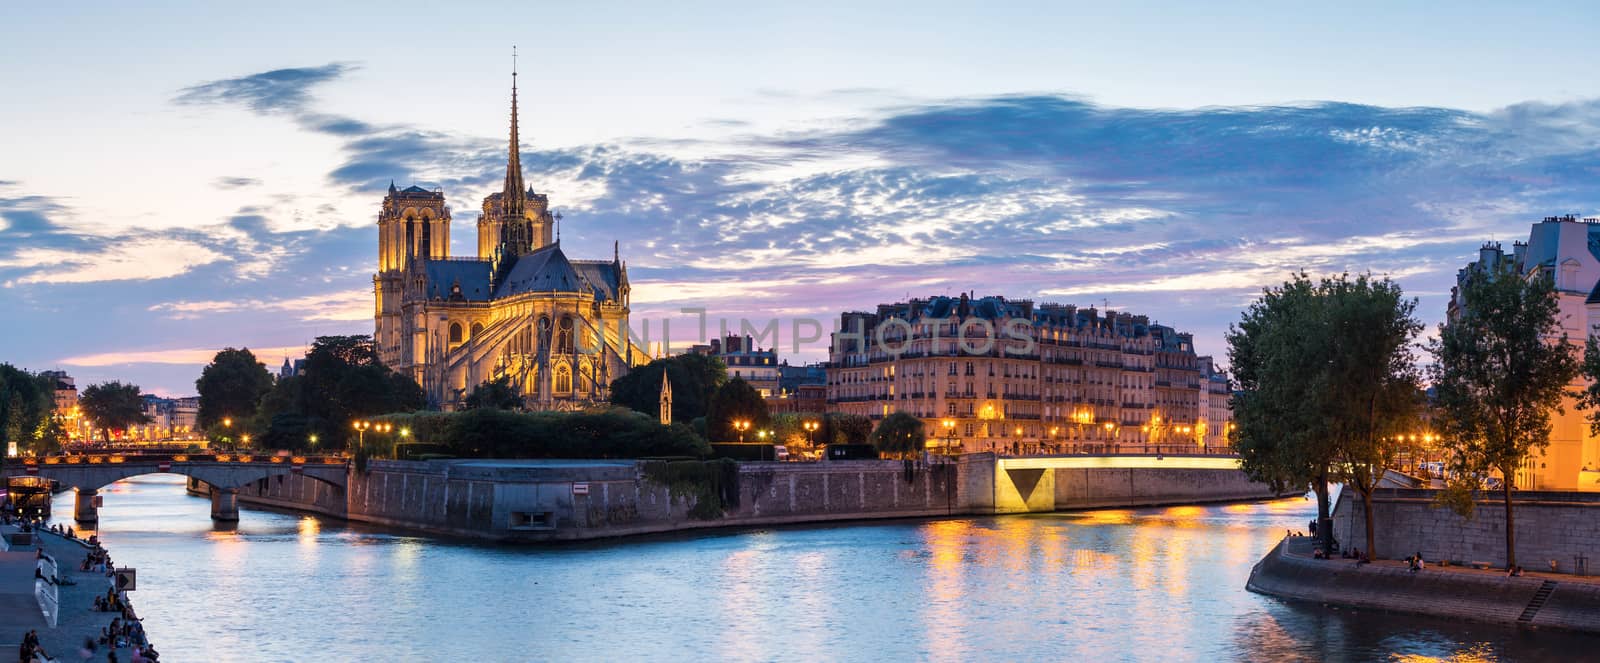 Panorama of Notre Dame Cathedral with Paris cityscape at dusk, France